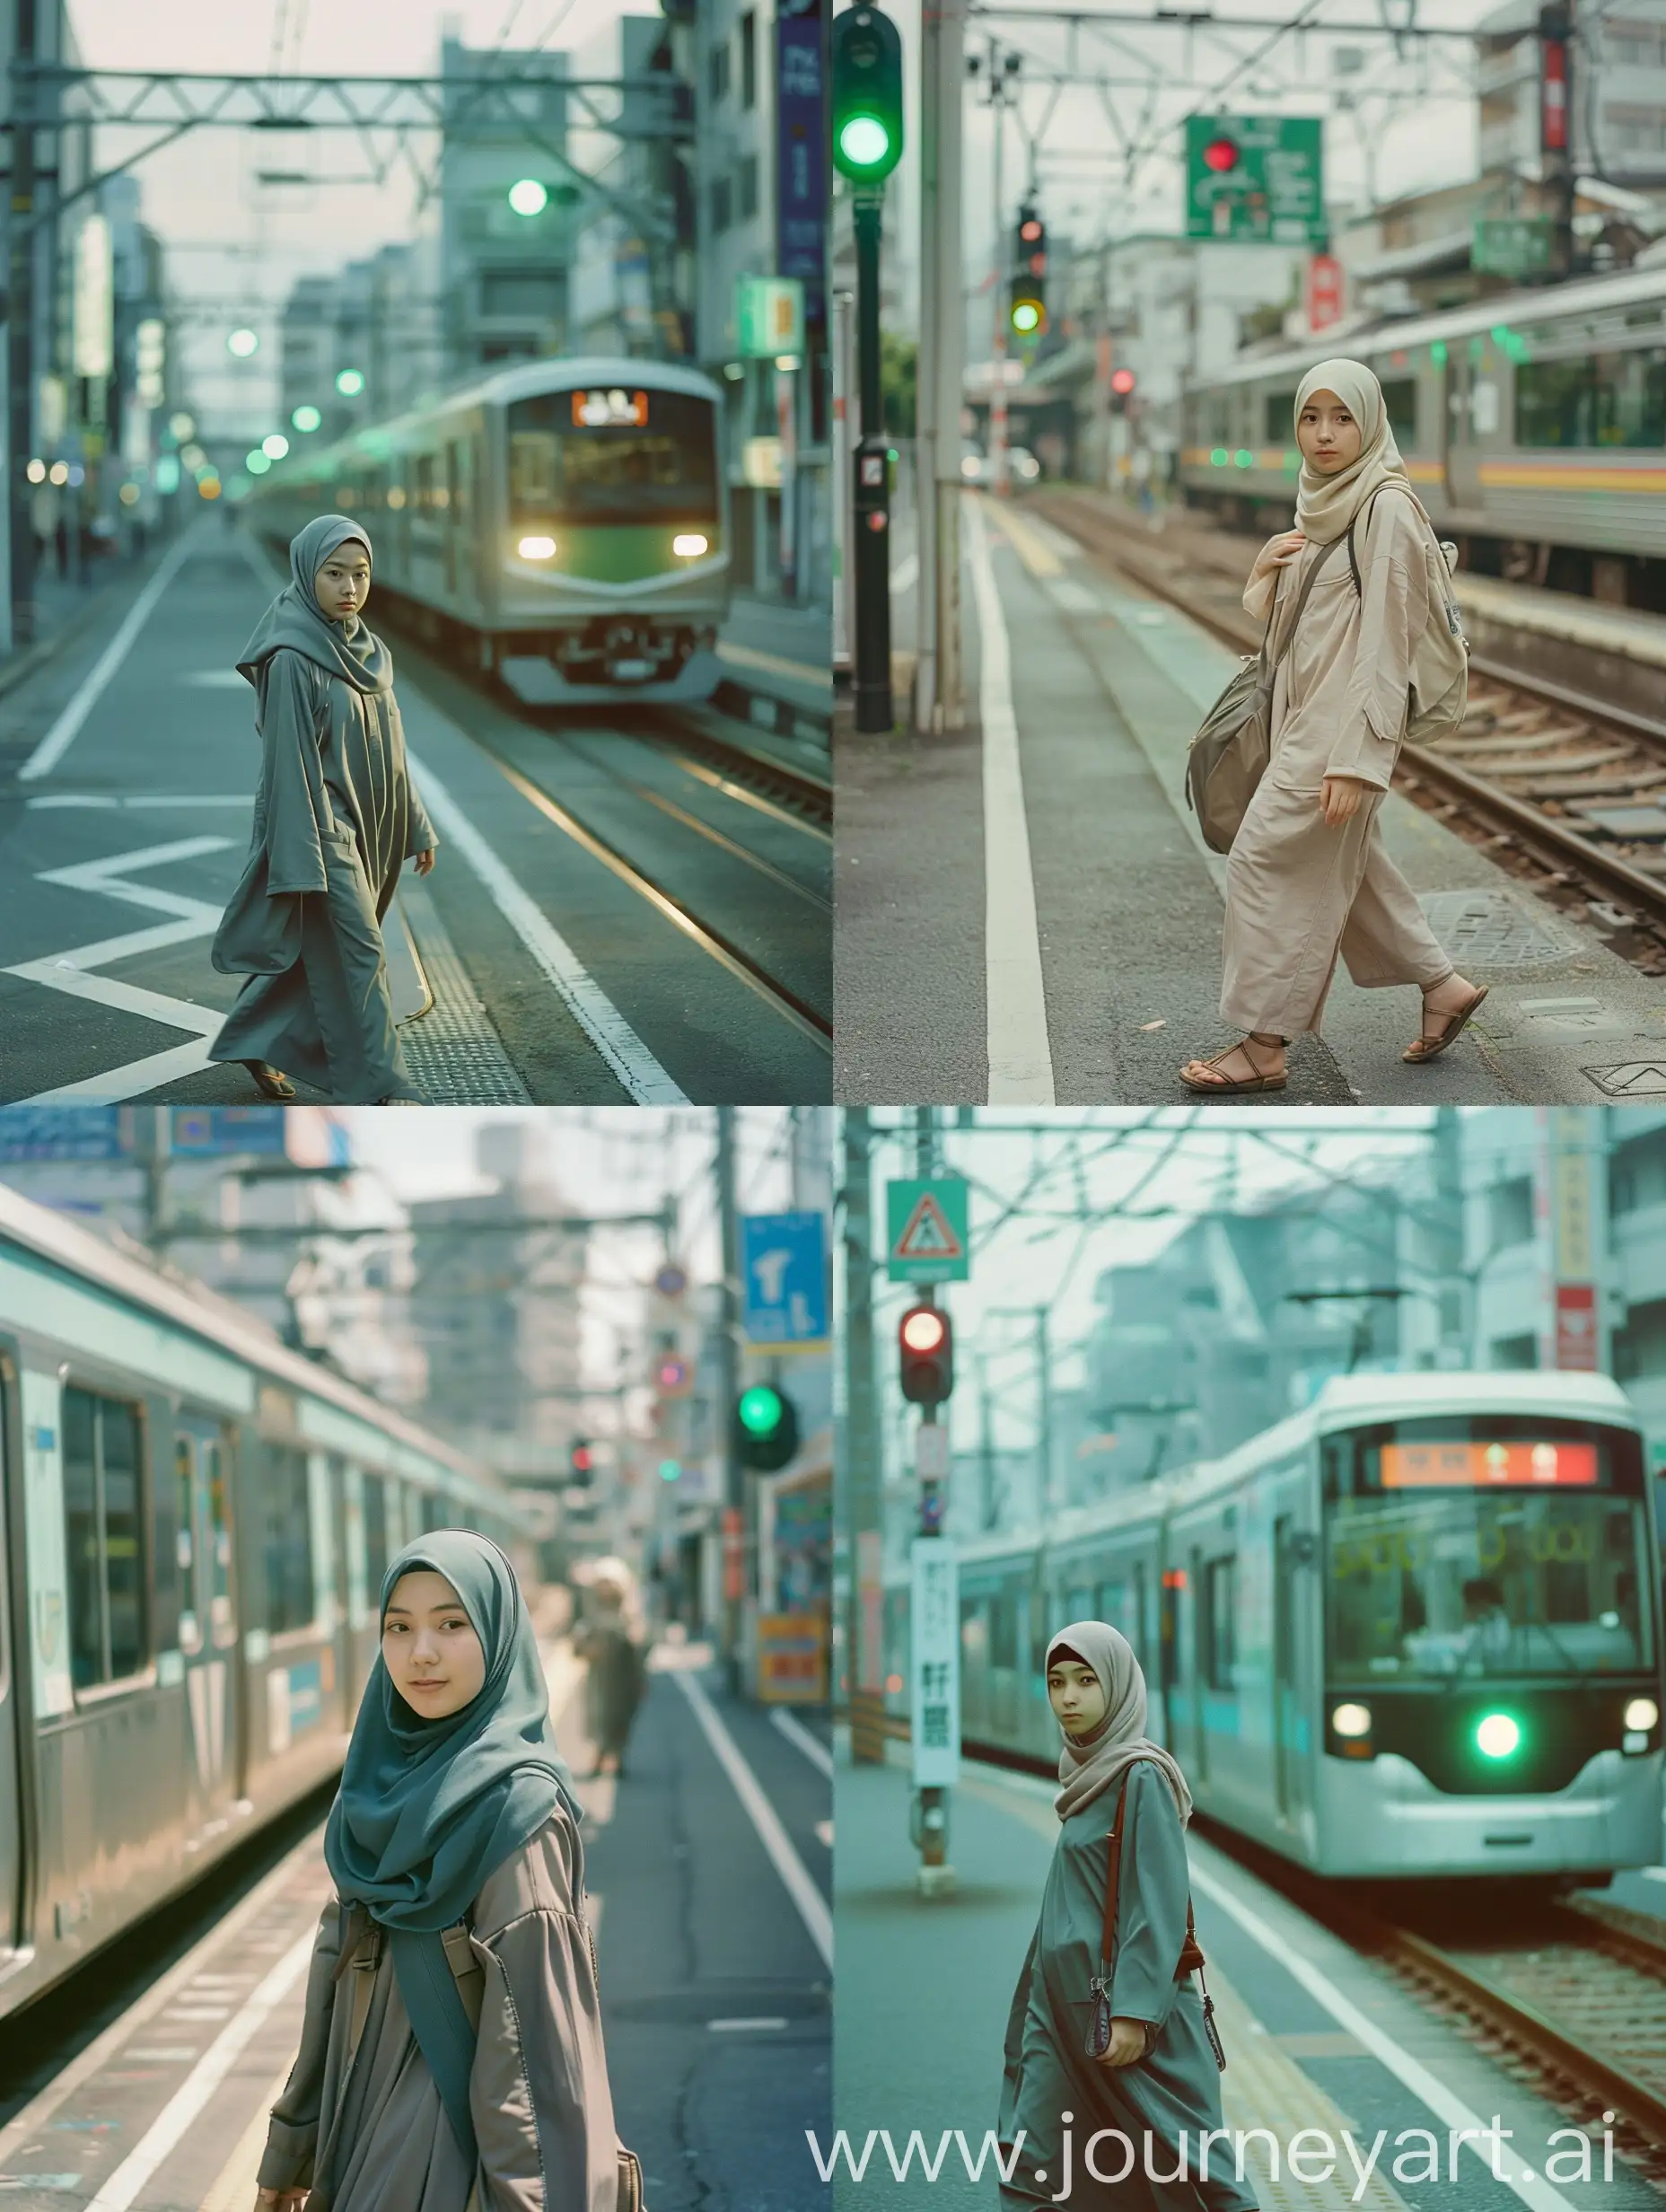 Full body, an Asian Muslim woman in hijab walking across the street near the train, a lonely girl waiting for the train, green light, hyper realistic film photography, fujicolor photo, color film street photography, portra 800 street photography,background should be clear and travel aesthetic details Japan, color analog photography, friendly face looking at the camera